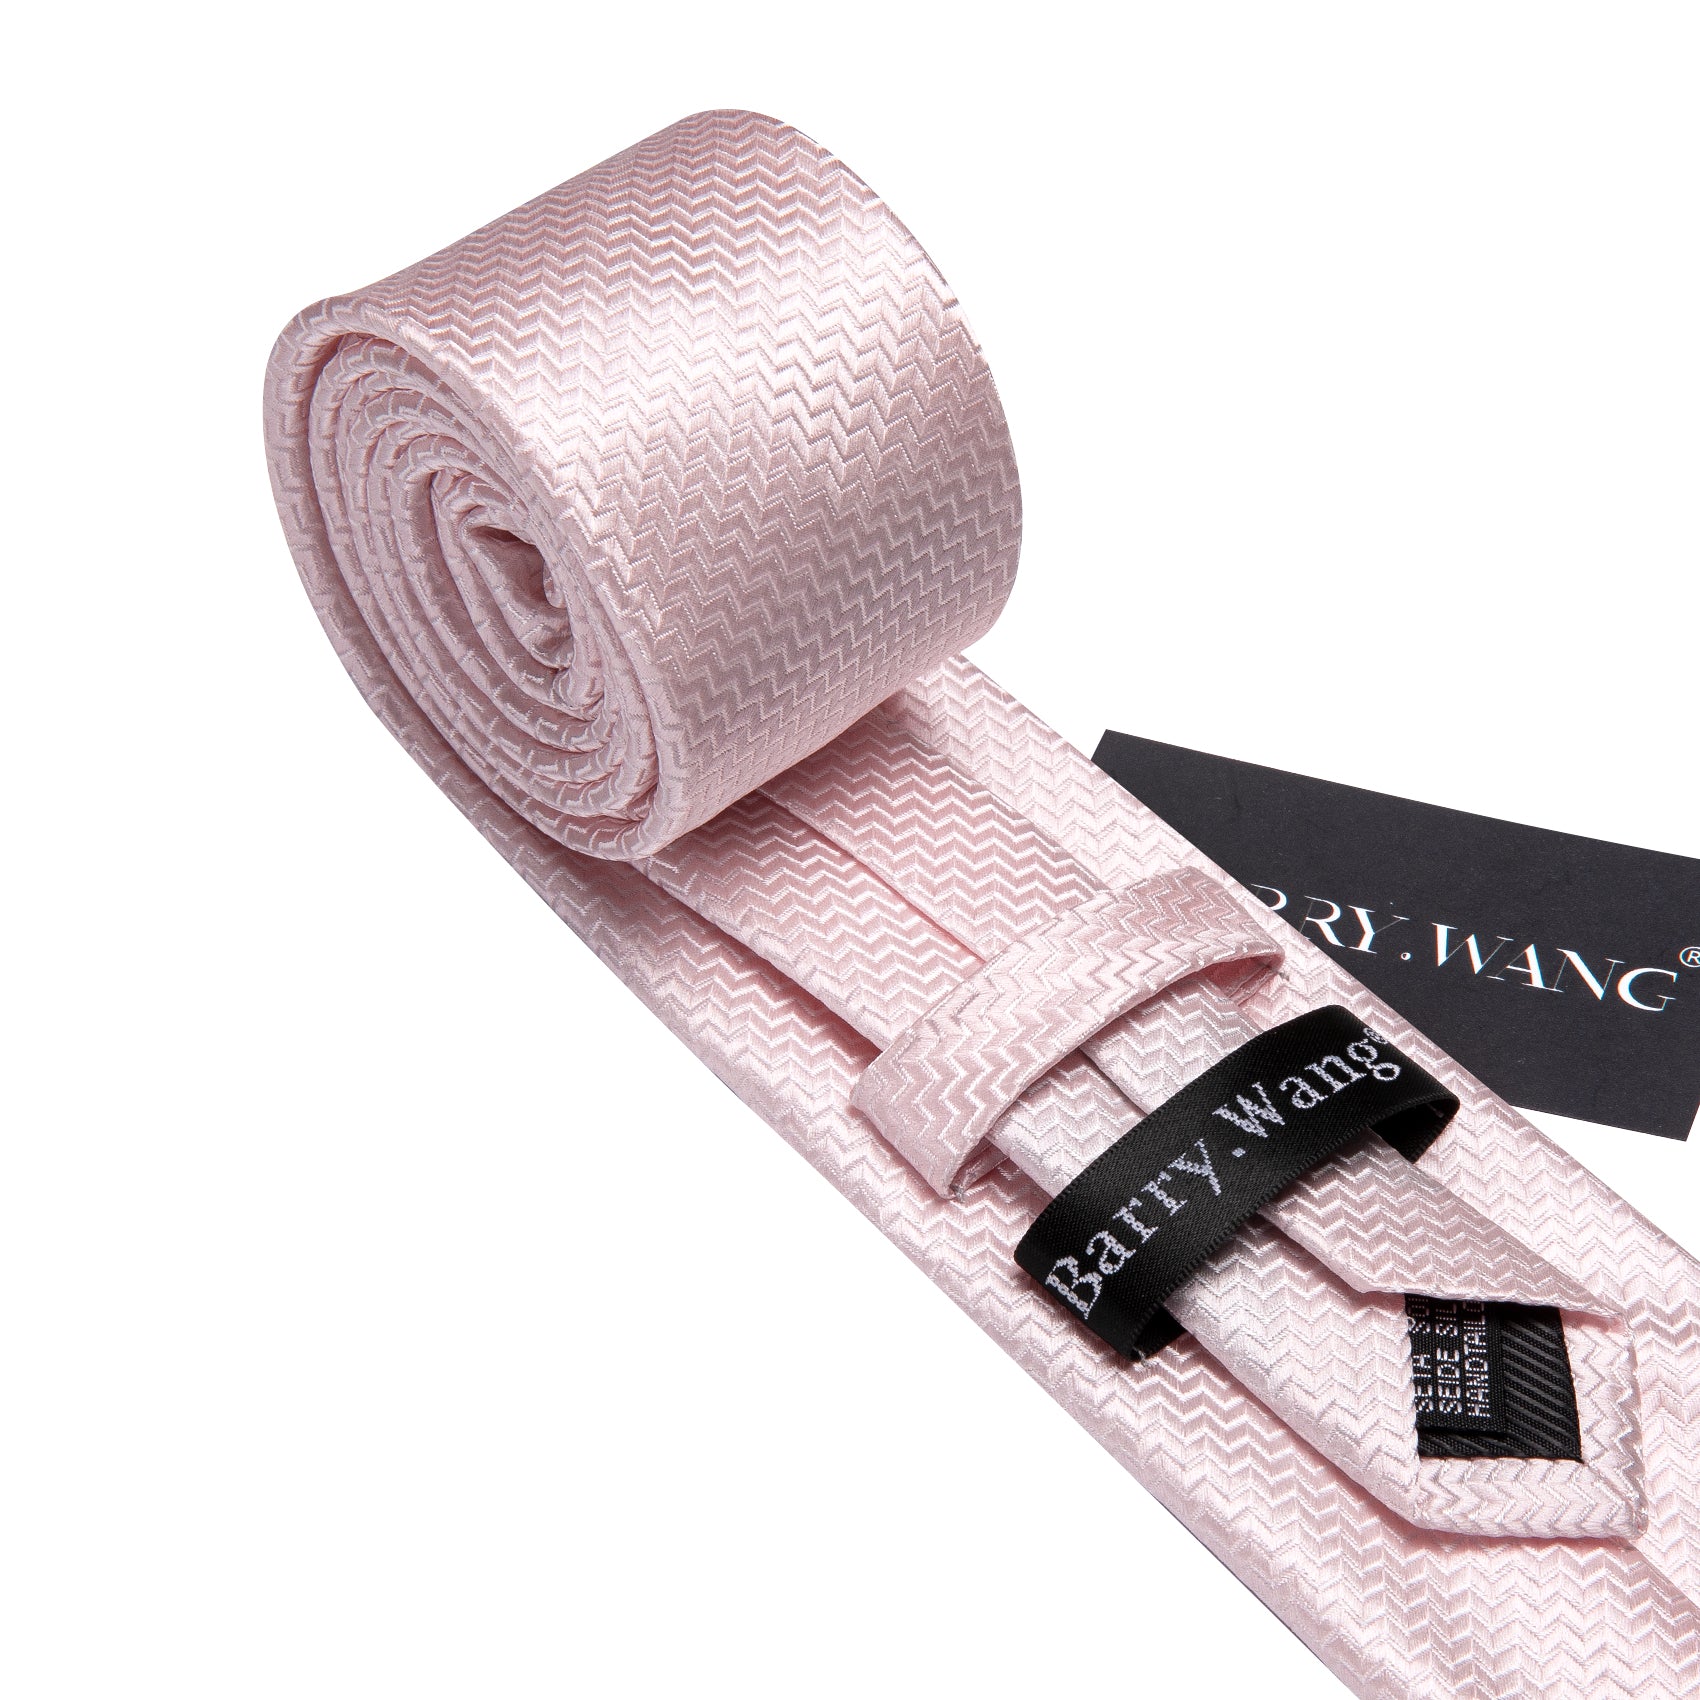 Pale Pink Silk 63 Inches Extra Long Tie Hanky Cufflinks Set